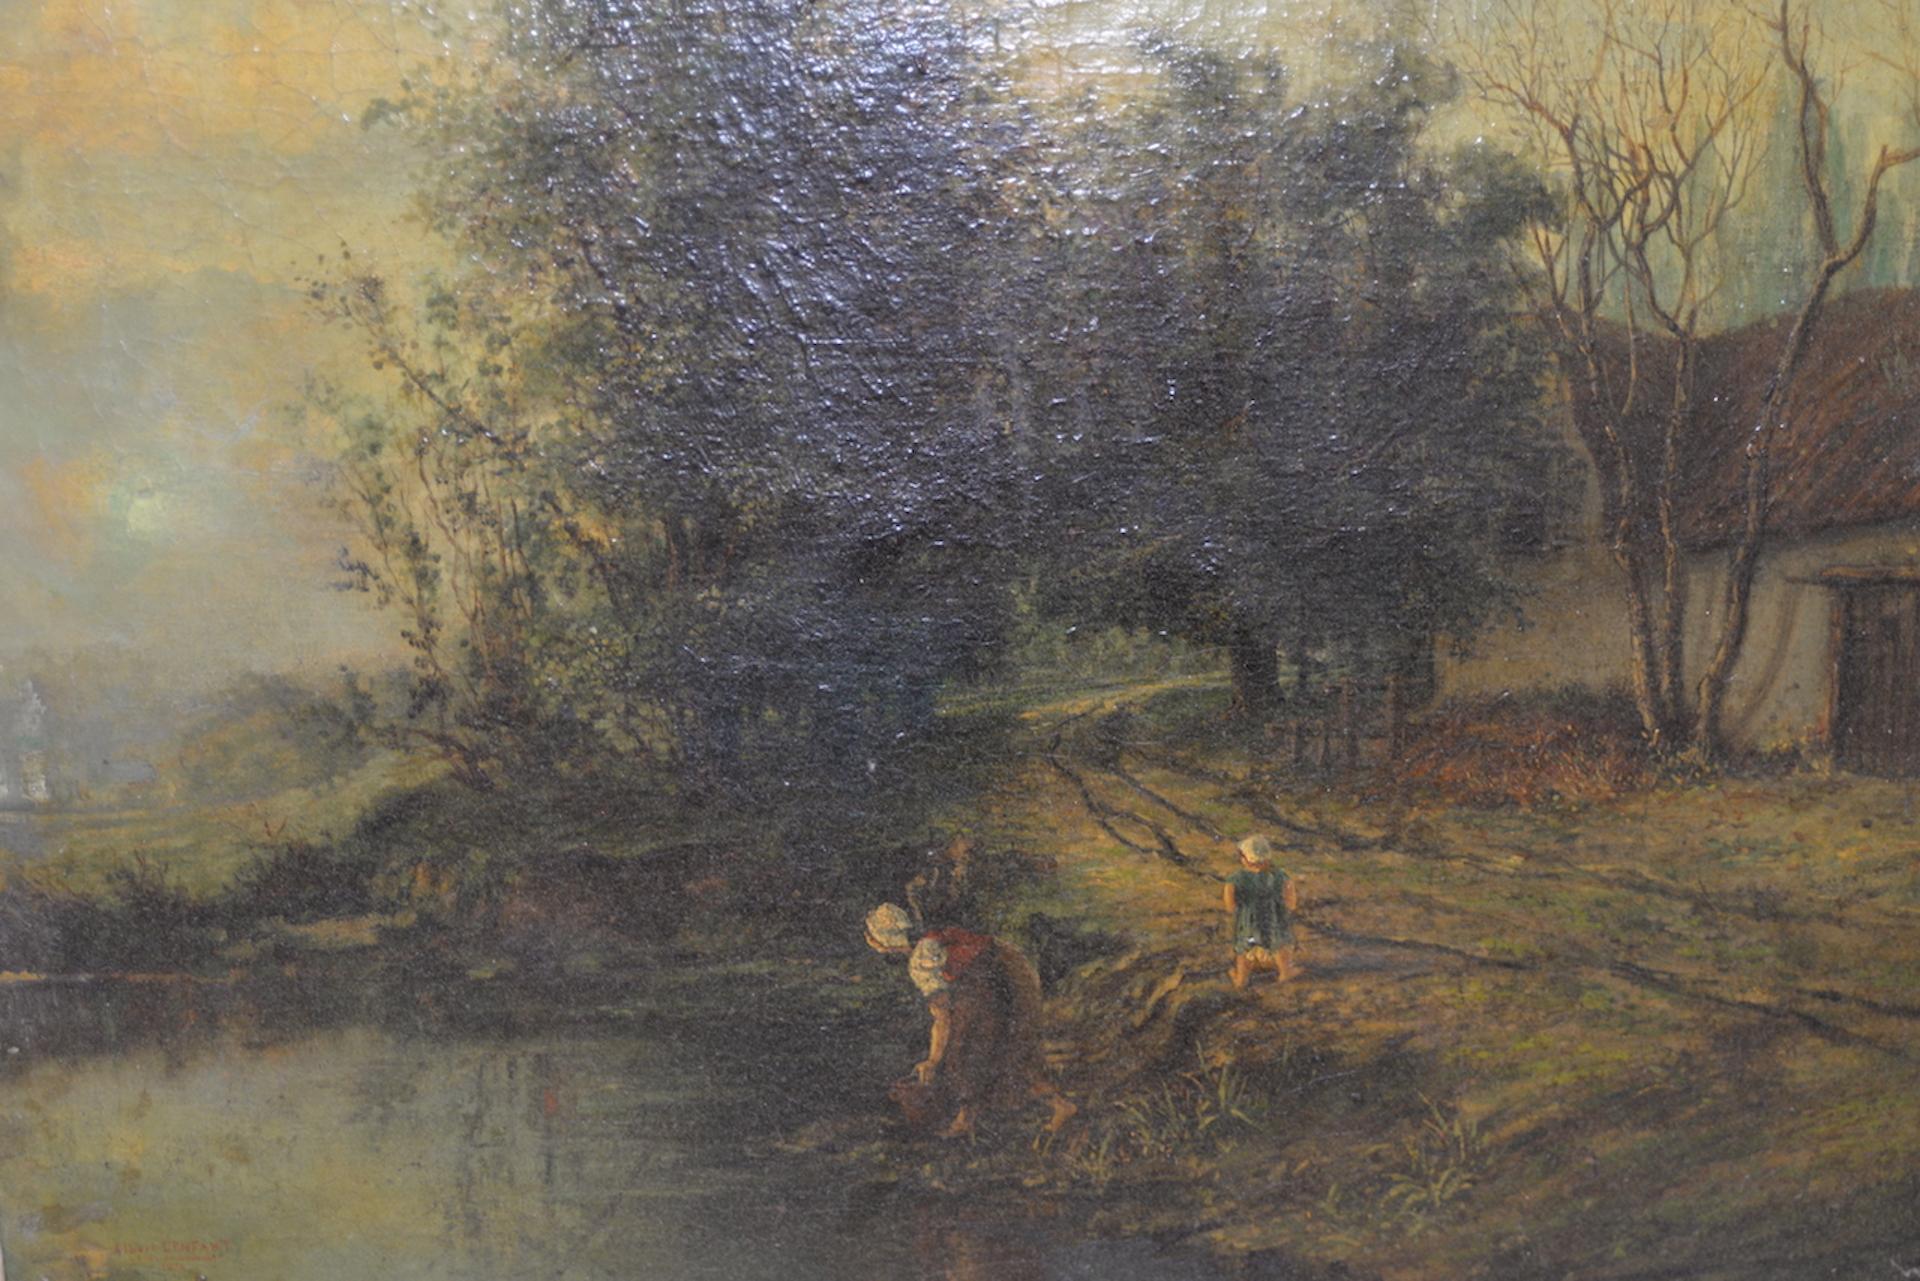 Fine antique oil painting by French artist Albert Lenfant, circa 1874.

A wonderful French country landscape with a woman gathering water from the river and child close behind.

This painting is dated 1874.

Original oil on canvas. Dimensions: